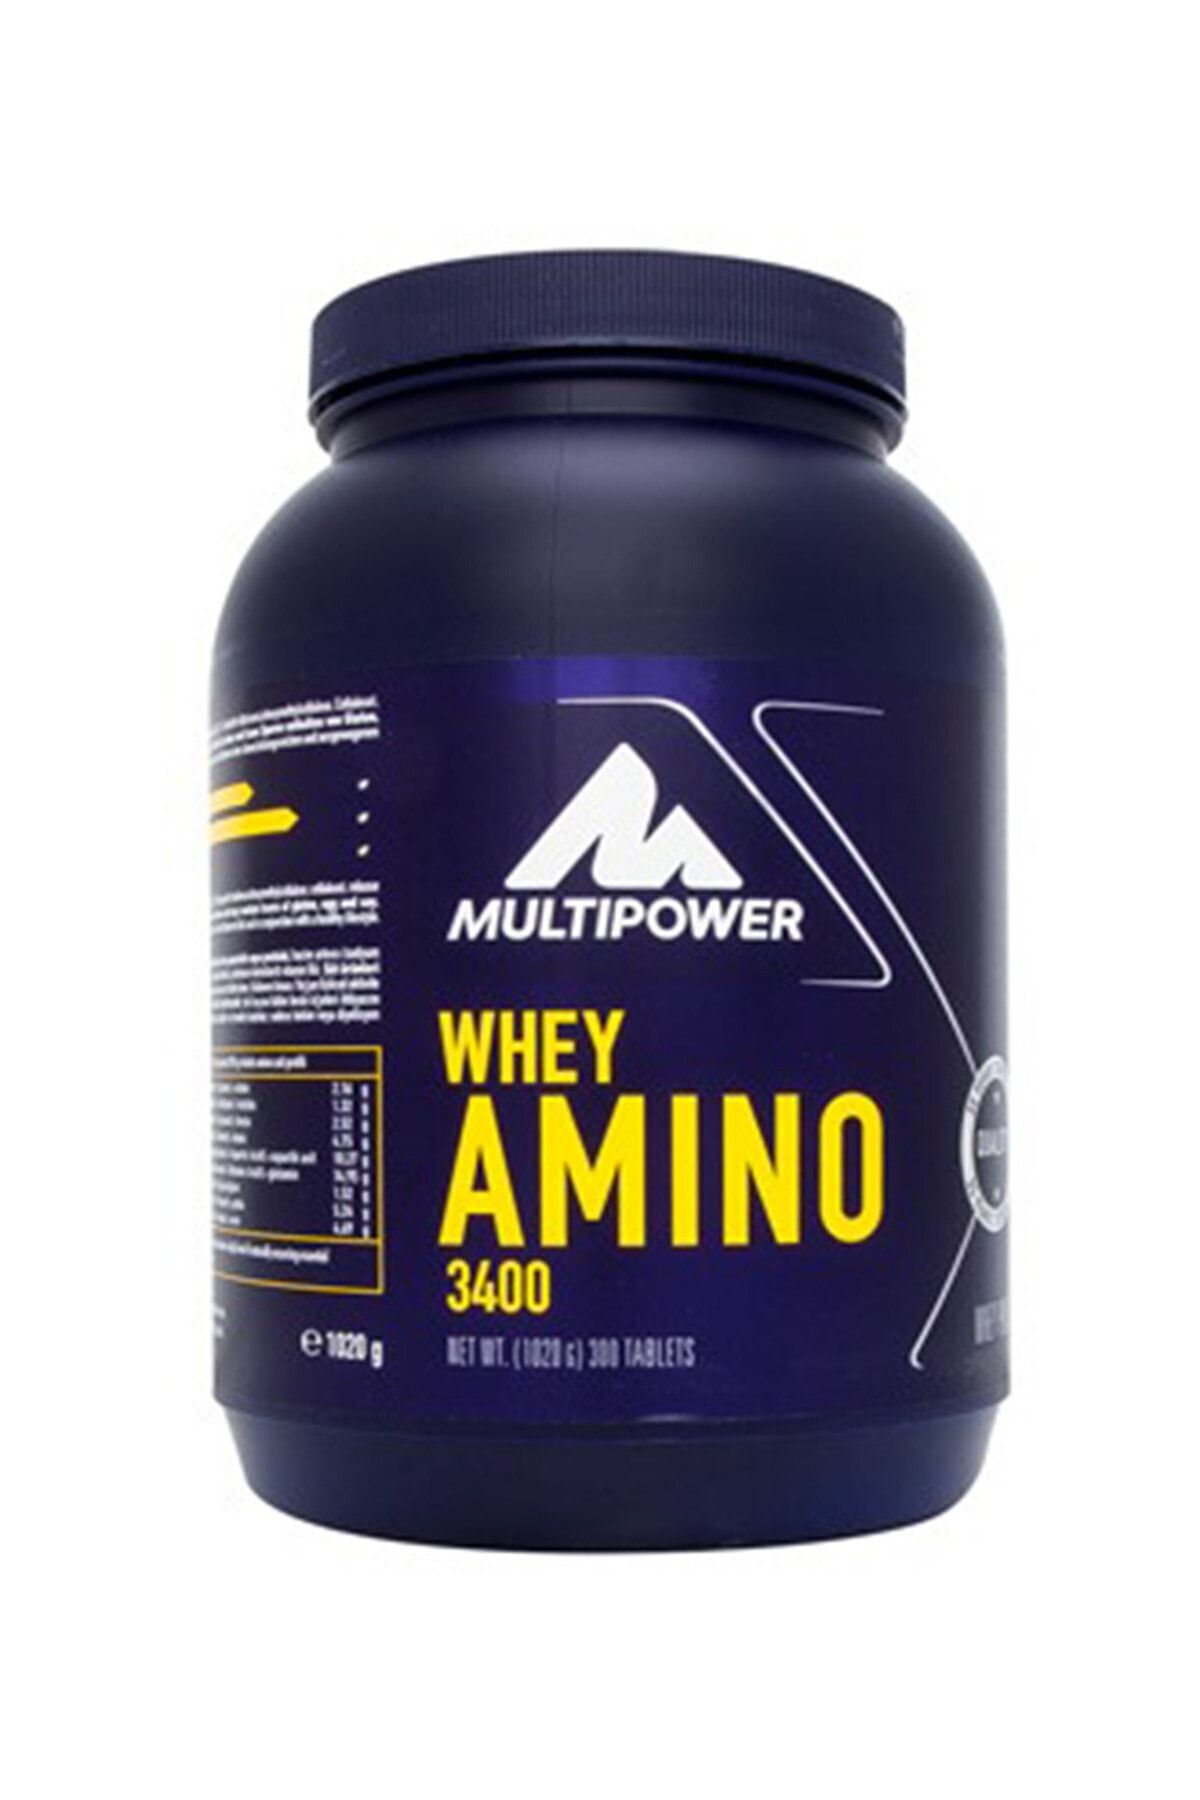 Multipower Whey Amino 3400 300 Tablet Saamul081000